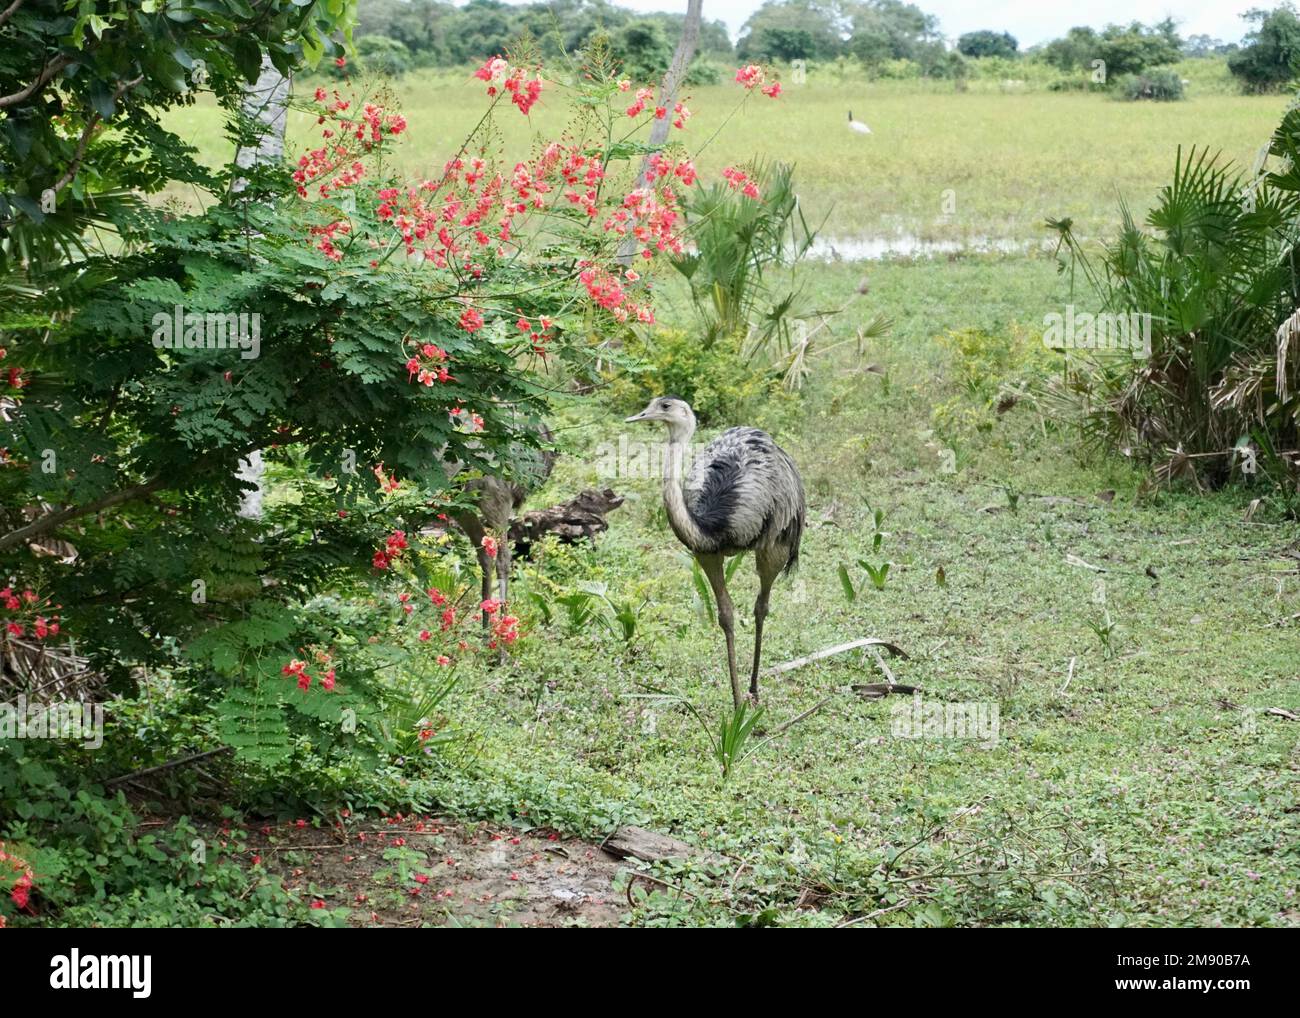 South American ostrich (emu) standing on a grass with flowers in Mato Grosso Stock Photo